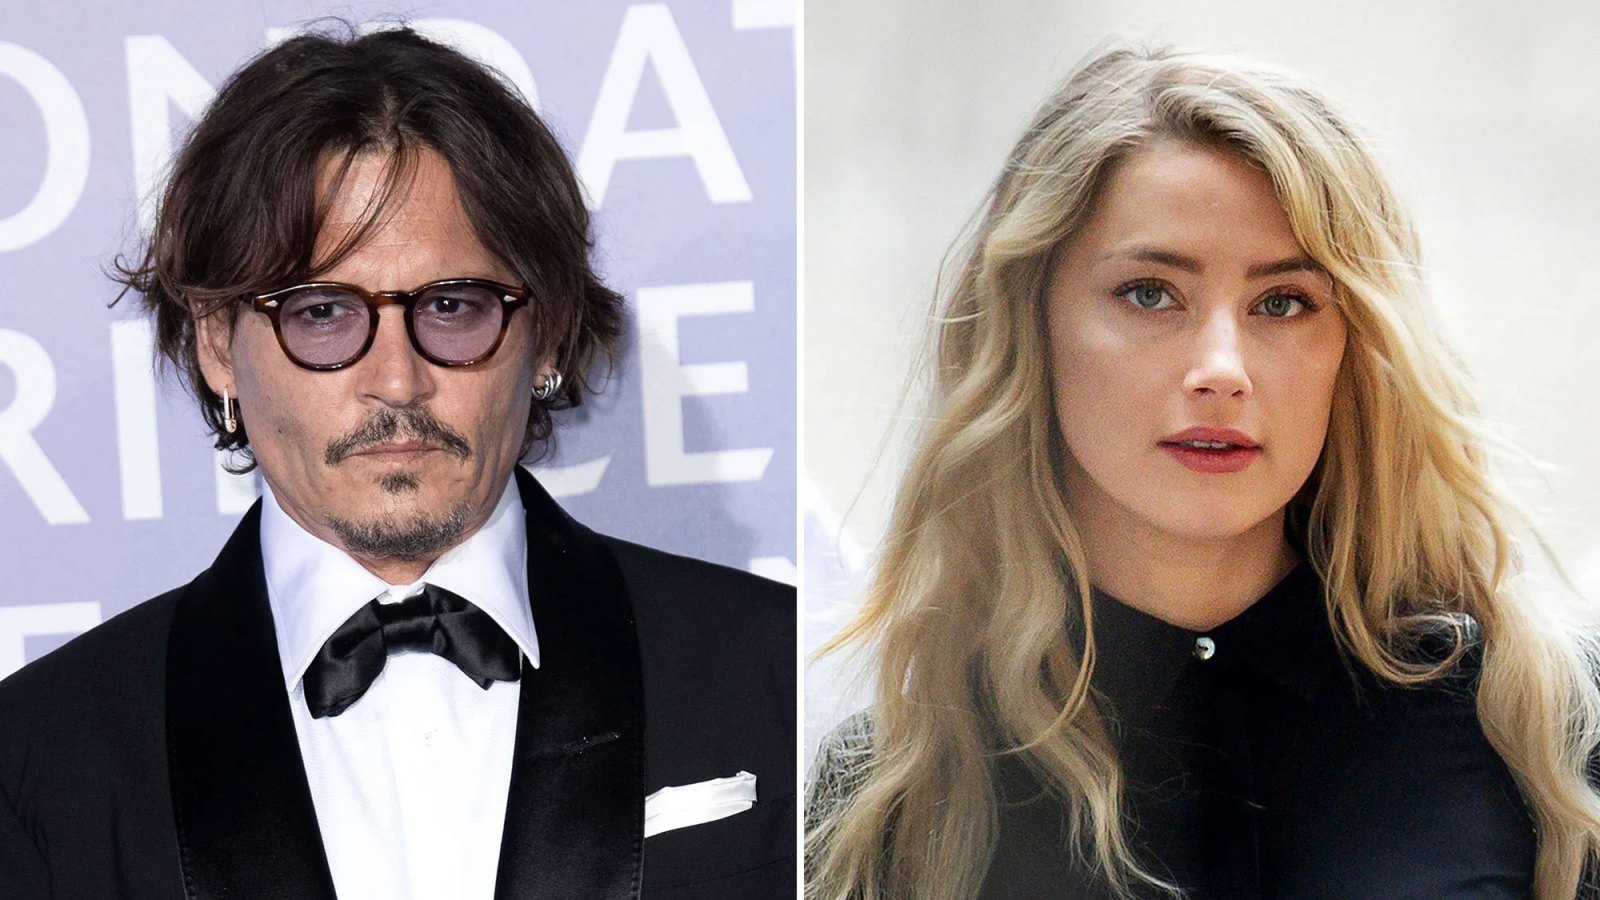 Johnny Depp Joins TikTok After Amber Heard Verdict Thanks His Unwavering Supporters in First Post